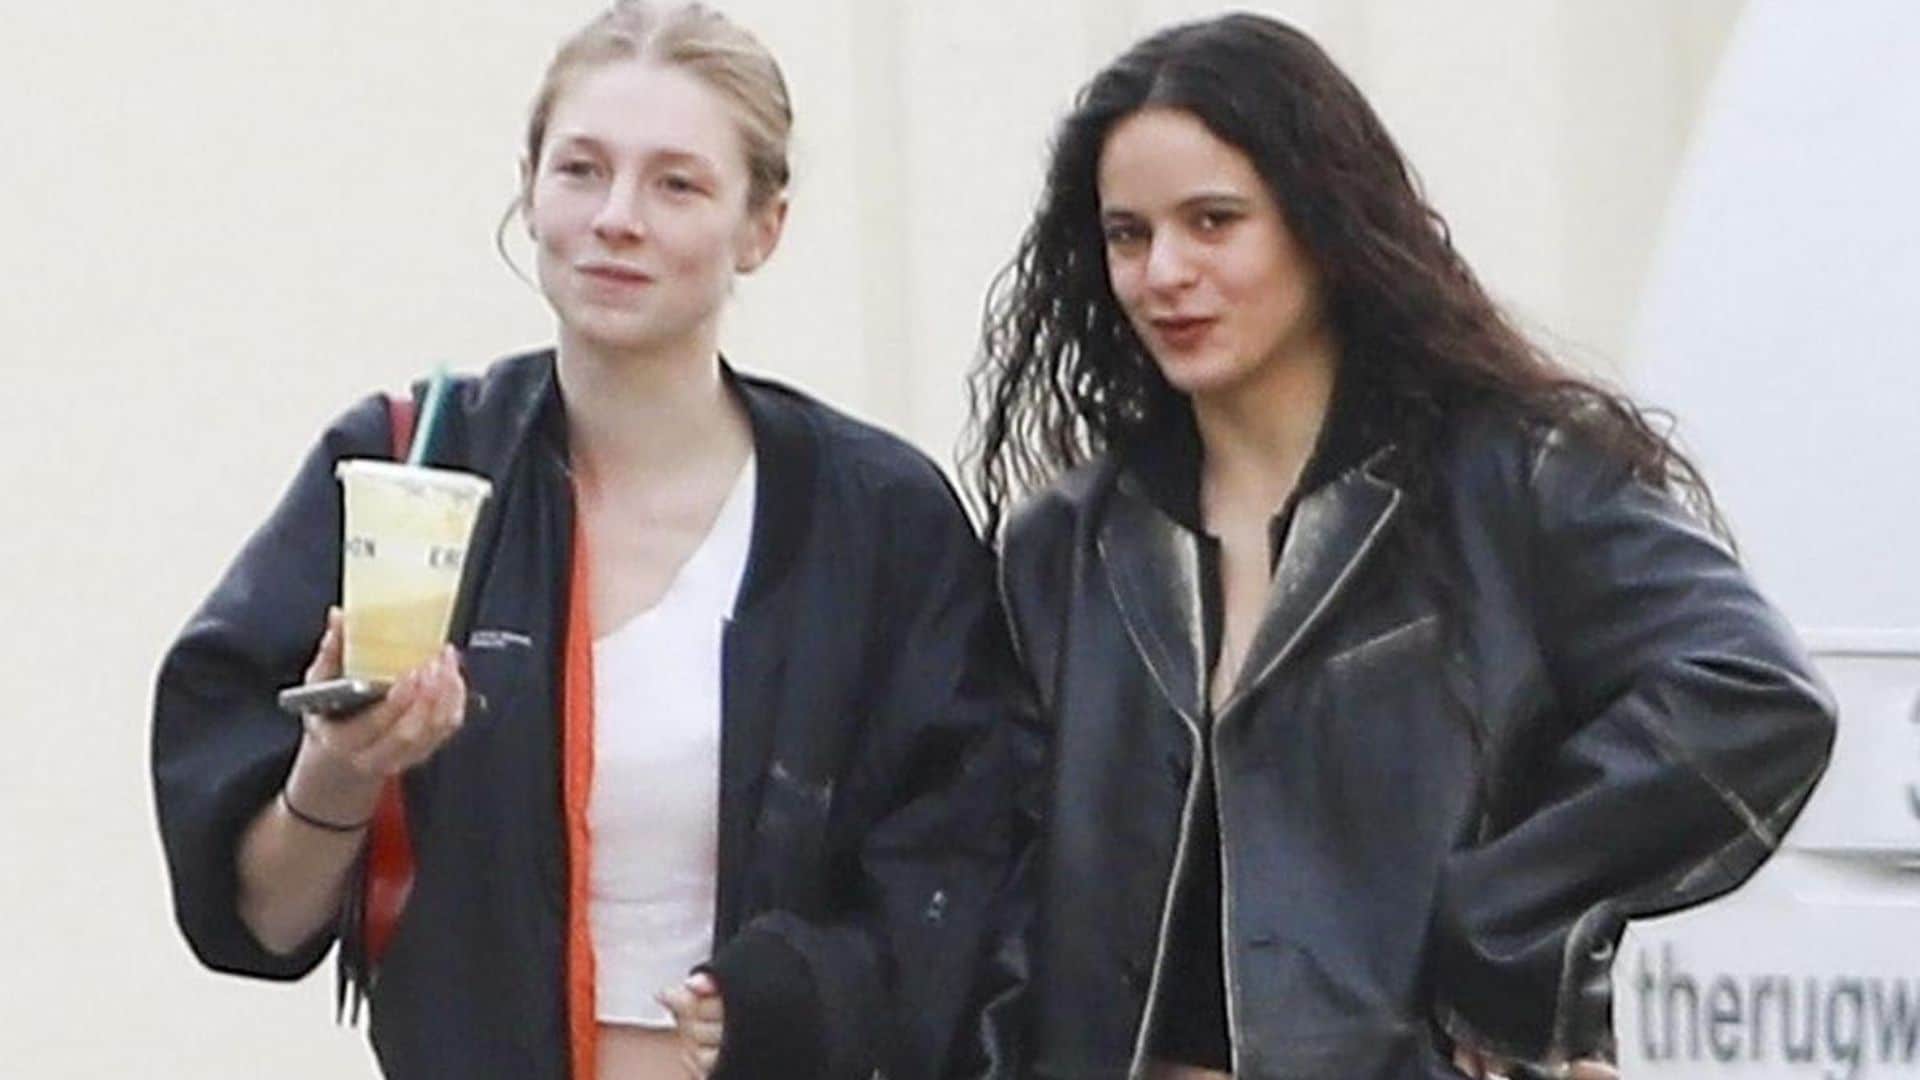 Rosalia reunites with Hunter Schafer after rumors about an alleged romance last year